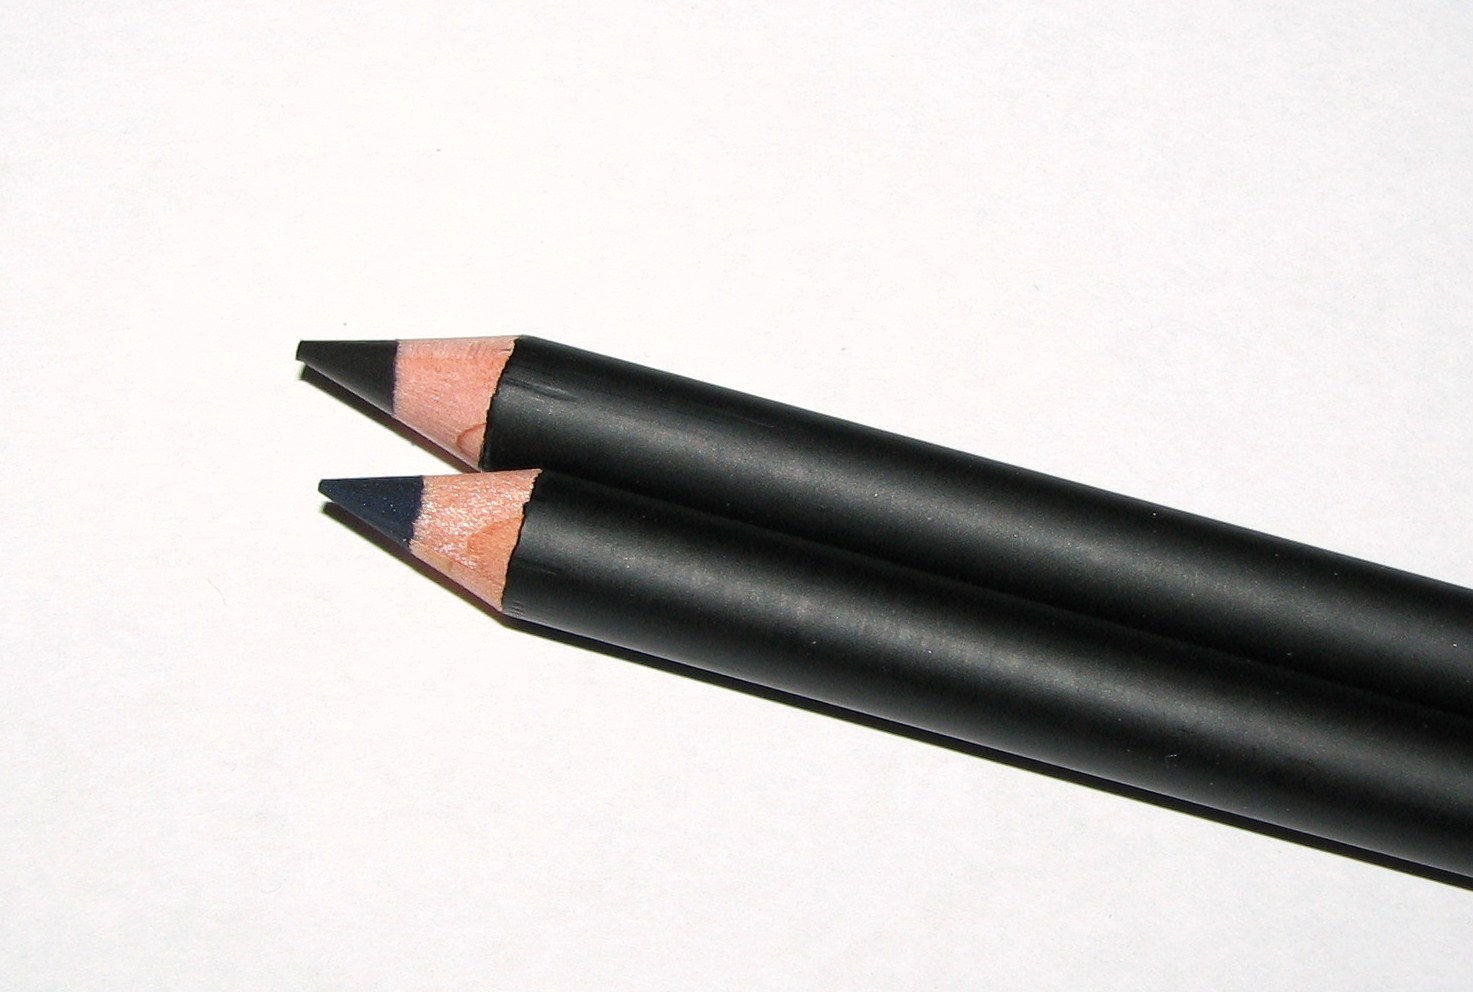 Chanel NOIR and MARINE Le Crayon Kohl Intense Eye Pencil Swatches